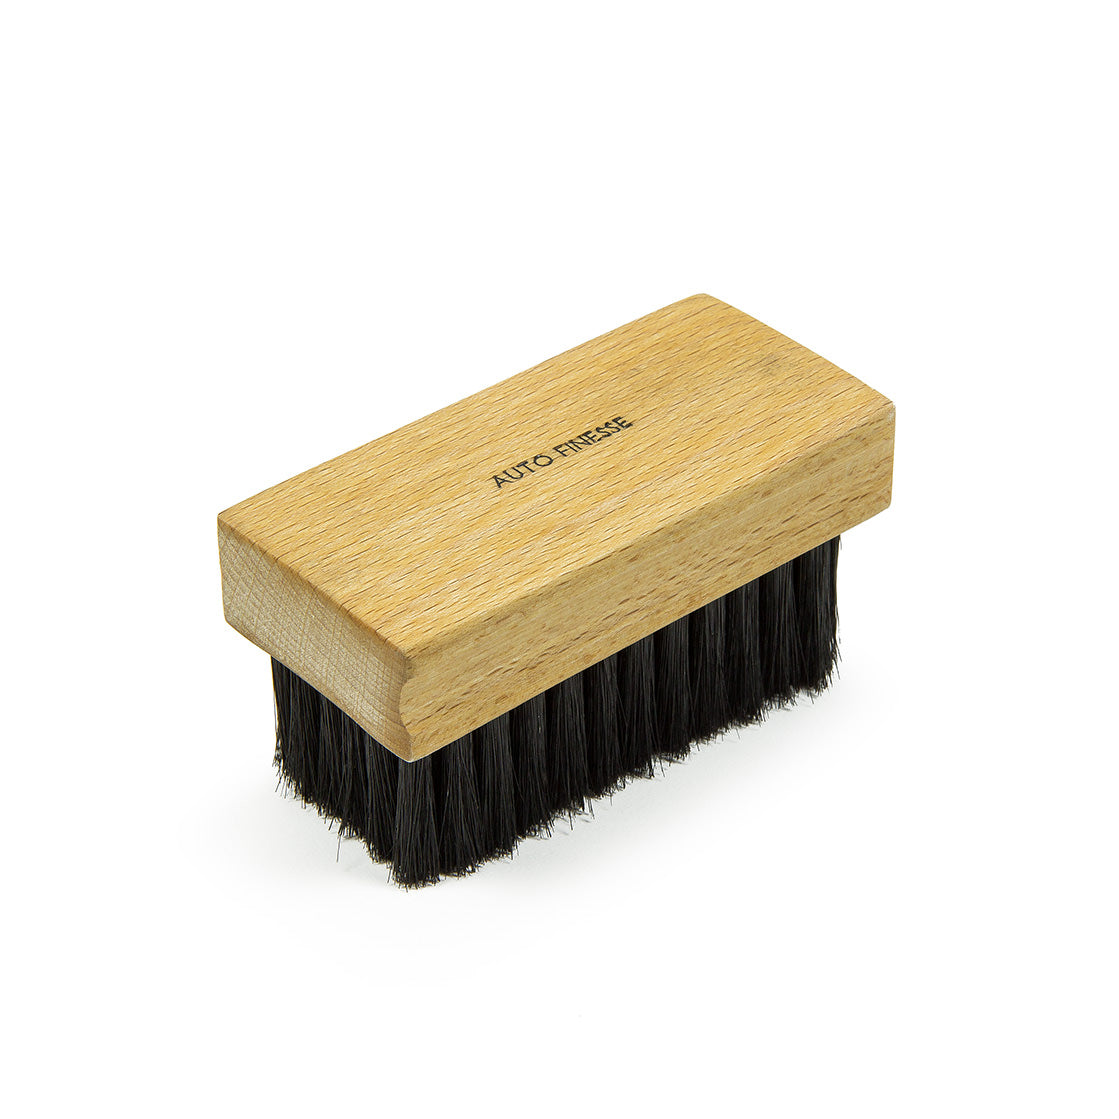 Auto Finesse Upholstery Brush